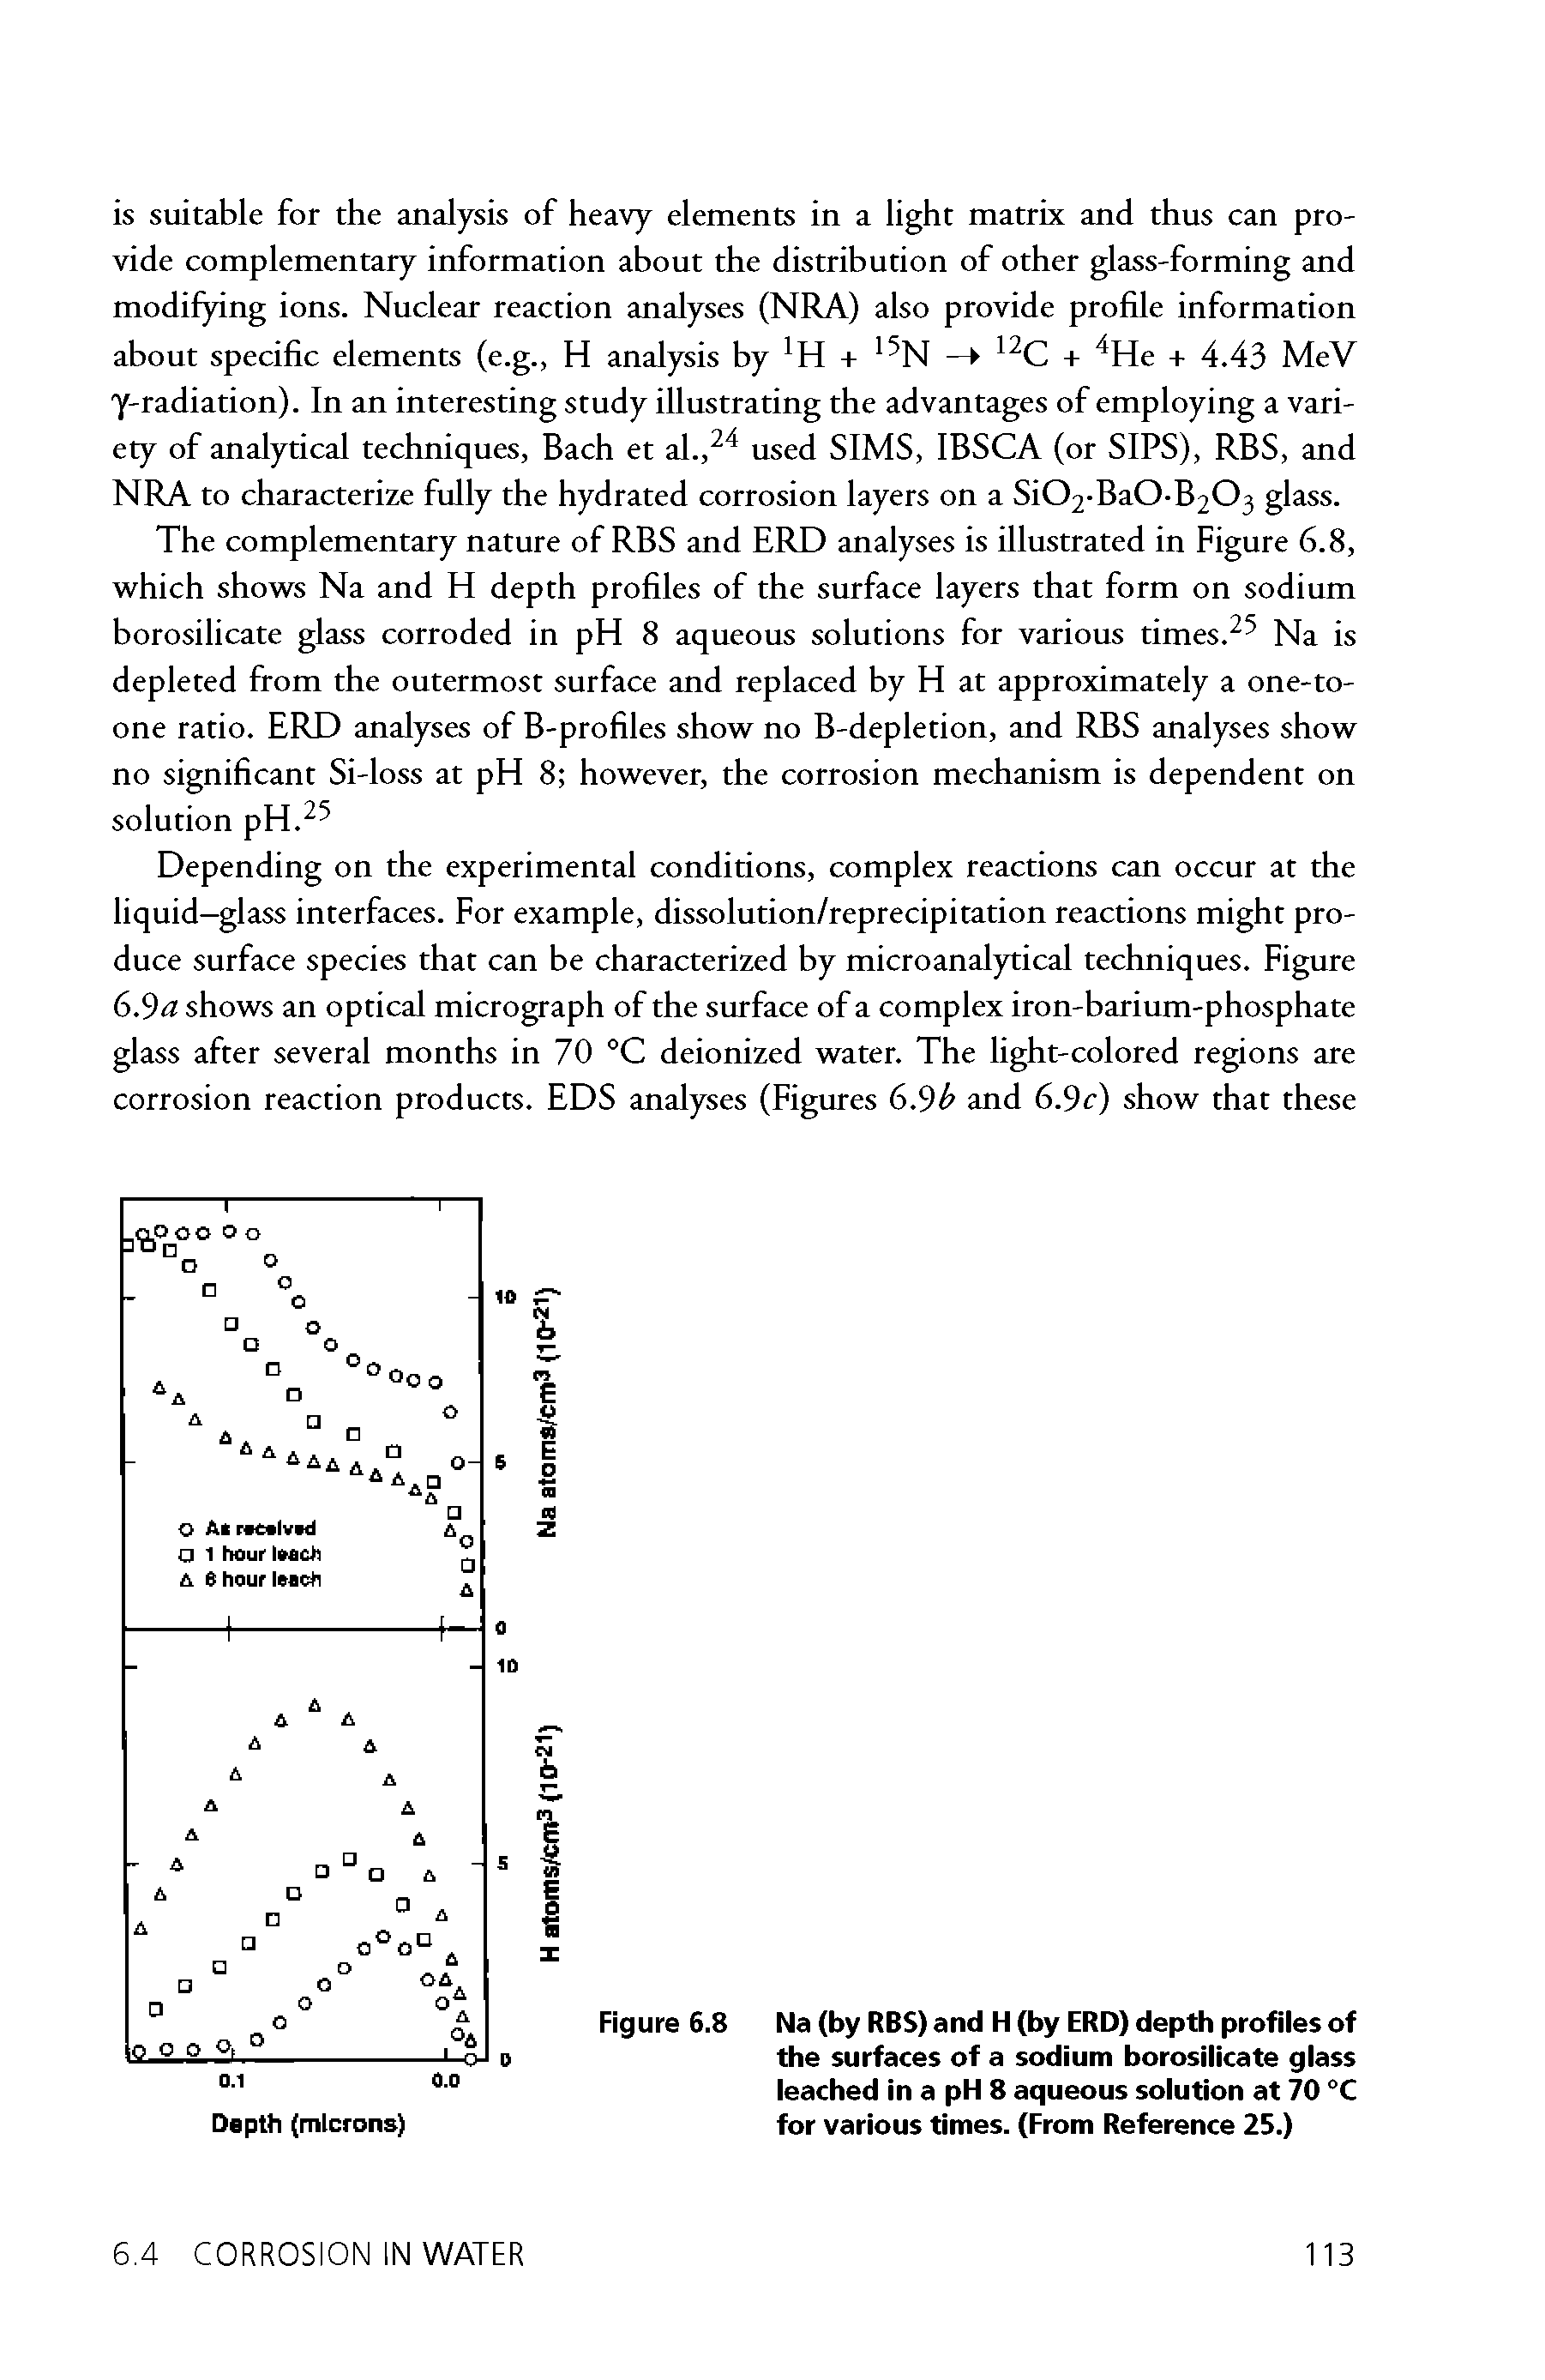 Figure 6.8 Na (by RBS) and H (by ERD) depth profiles of the surfaces of a sodium borosilicate glass leached in a pH 8 aqueous solution at 70 °C for various times. (From Reference 25.)...